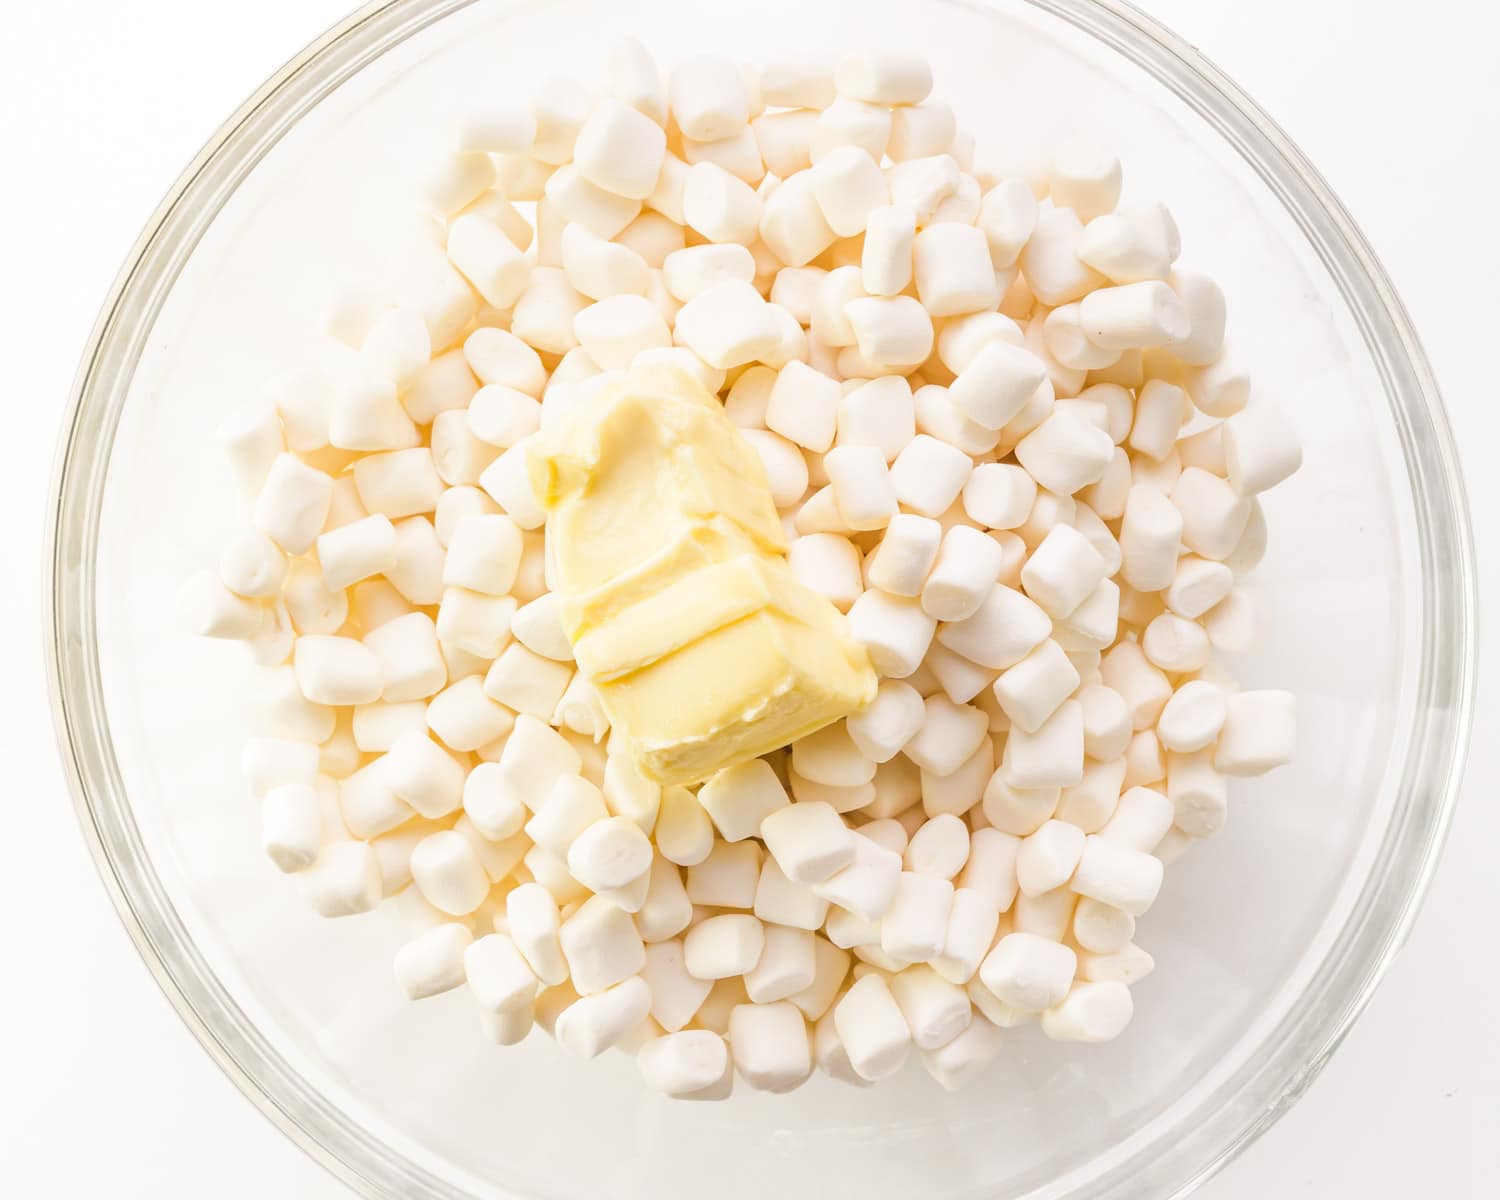 Mini marshmallows are combined in a bowl with vegan butter.